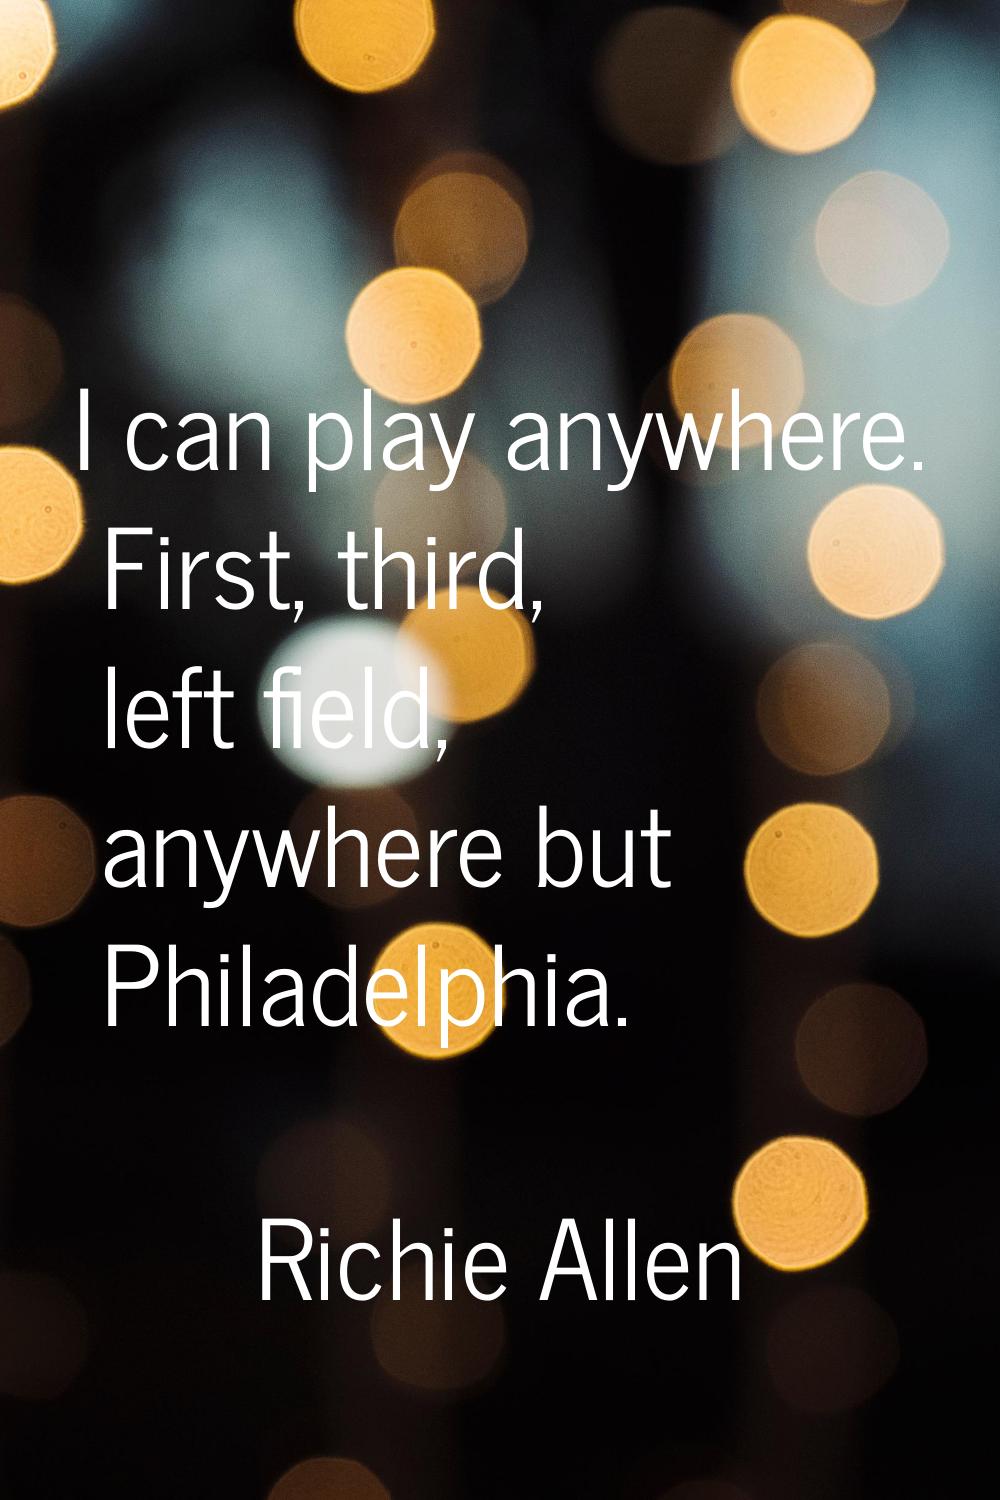 I can play anywhere. First, third, left field, anywhere but Philadelphia.